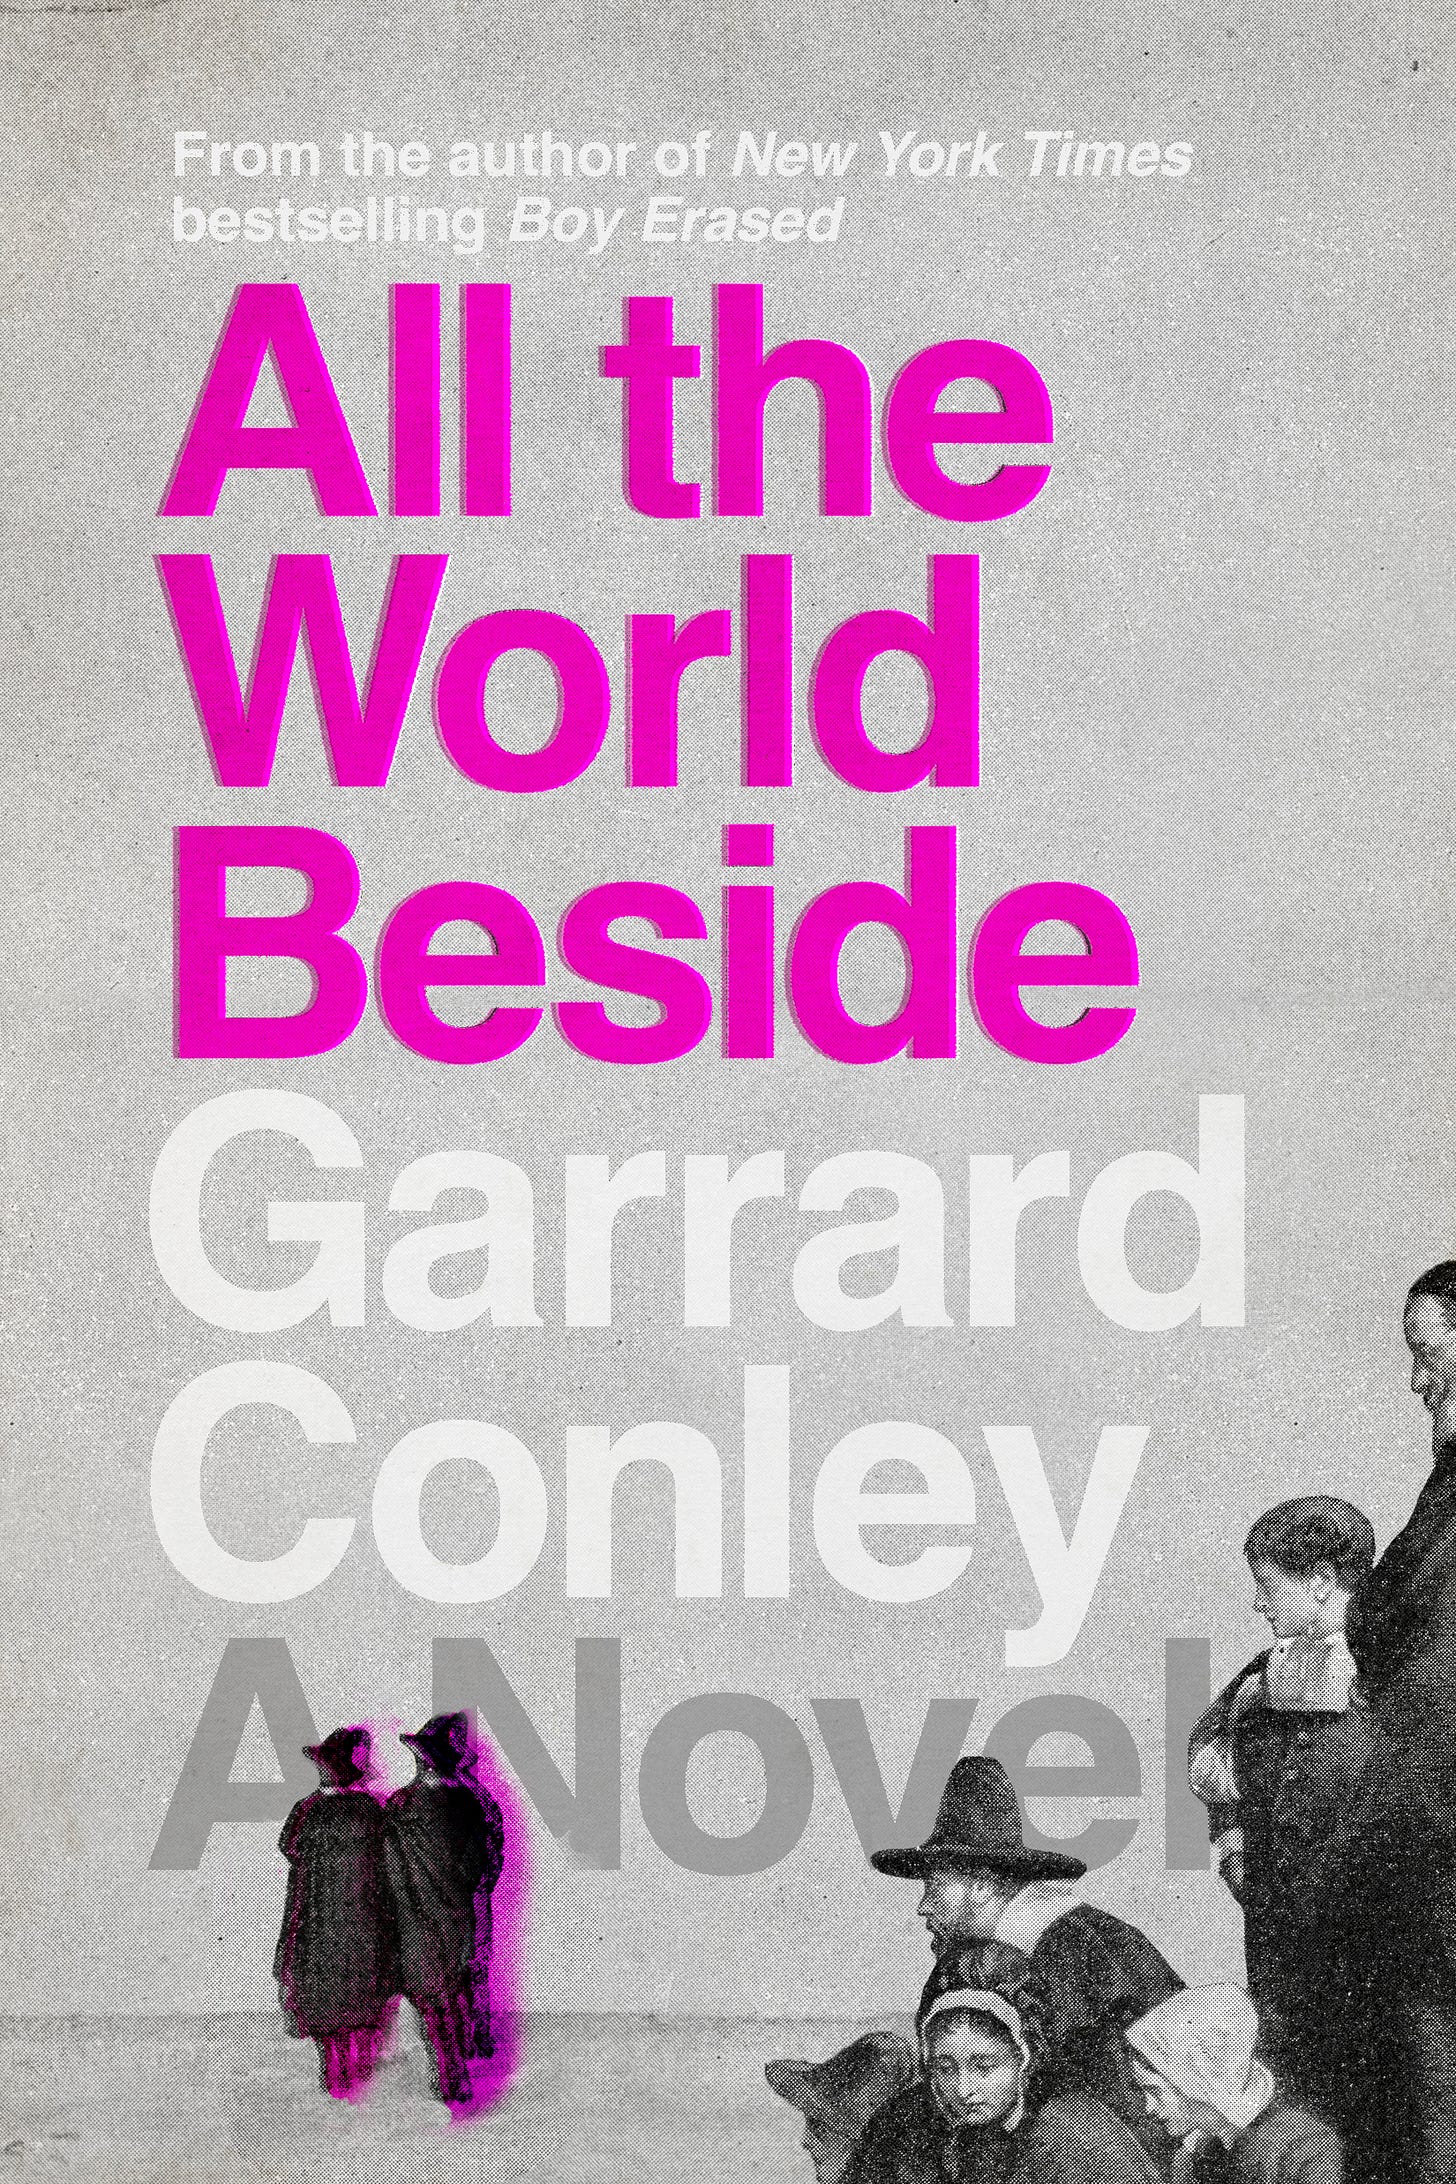 Image shows the cover of Garrard Conley's novel ALL THE WORLD BESIDE